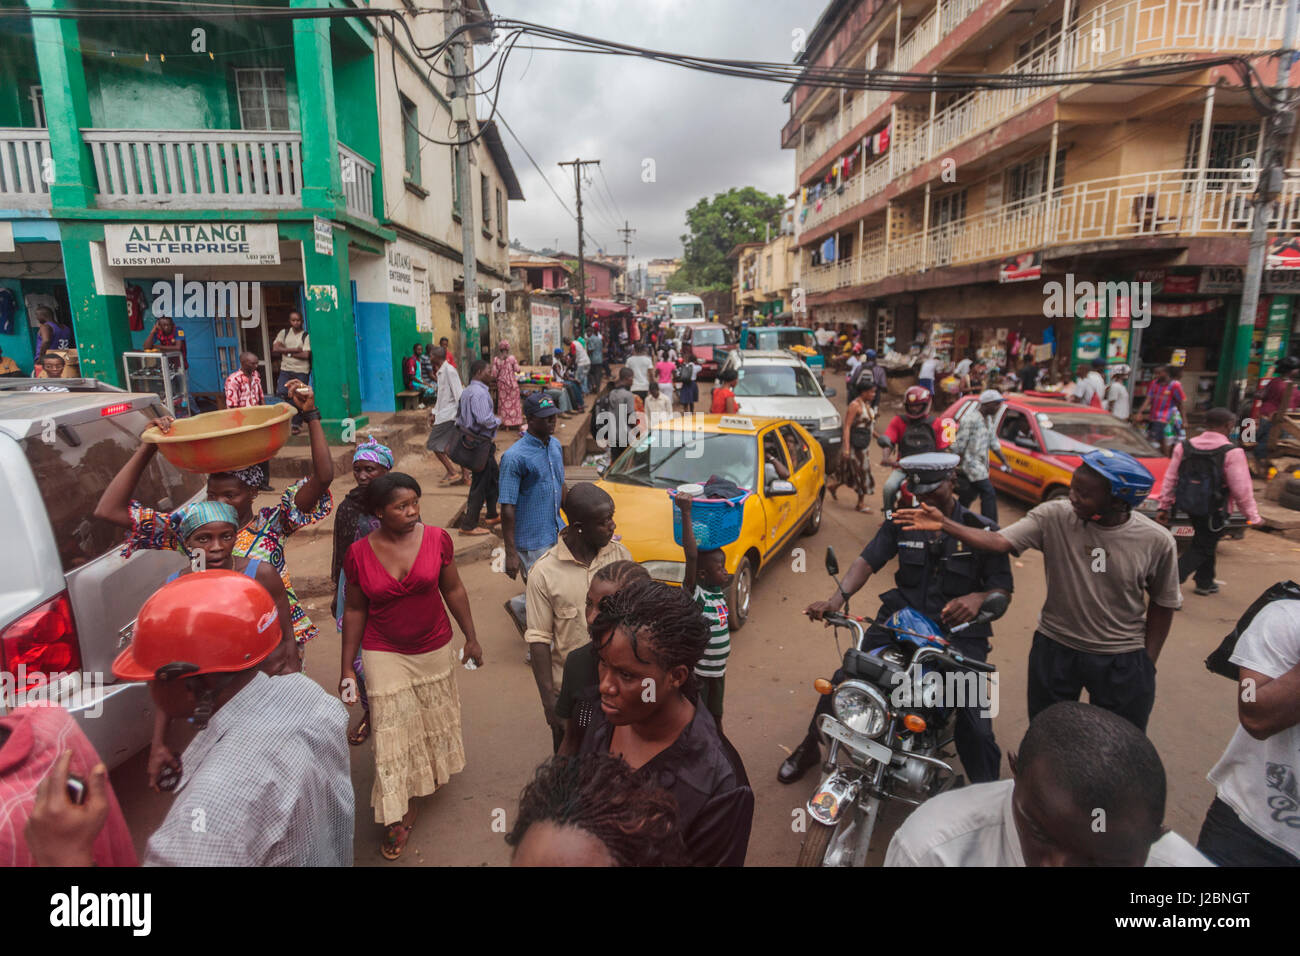 Africa, Sierra Leone, Freetown. Cars, motorcycles and pedestrians at a crowded intersection. Stock Photo